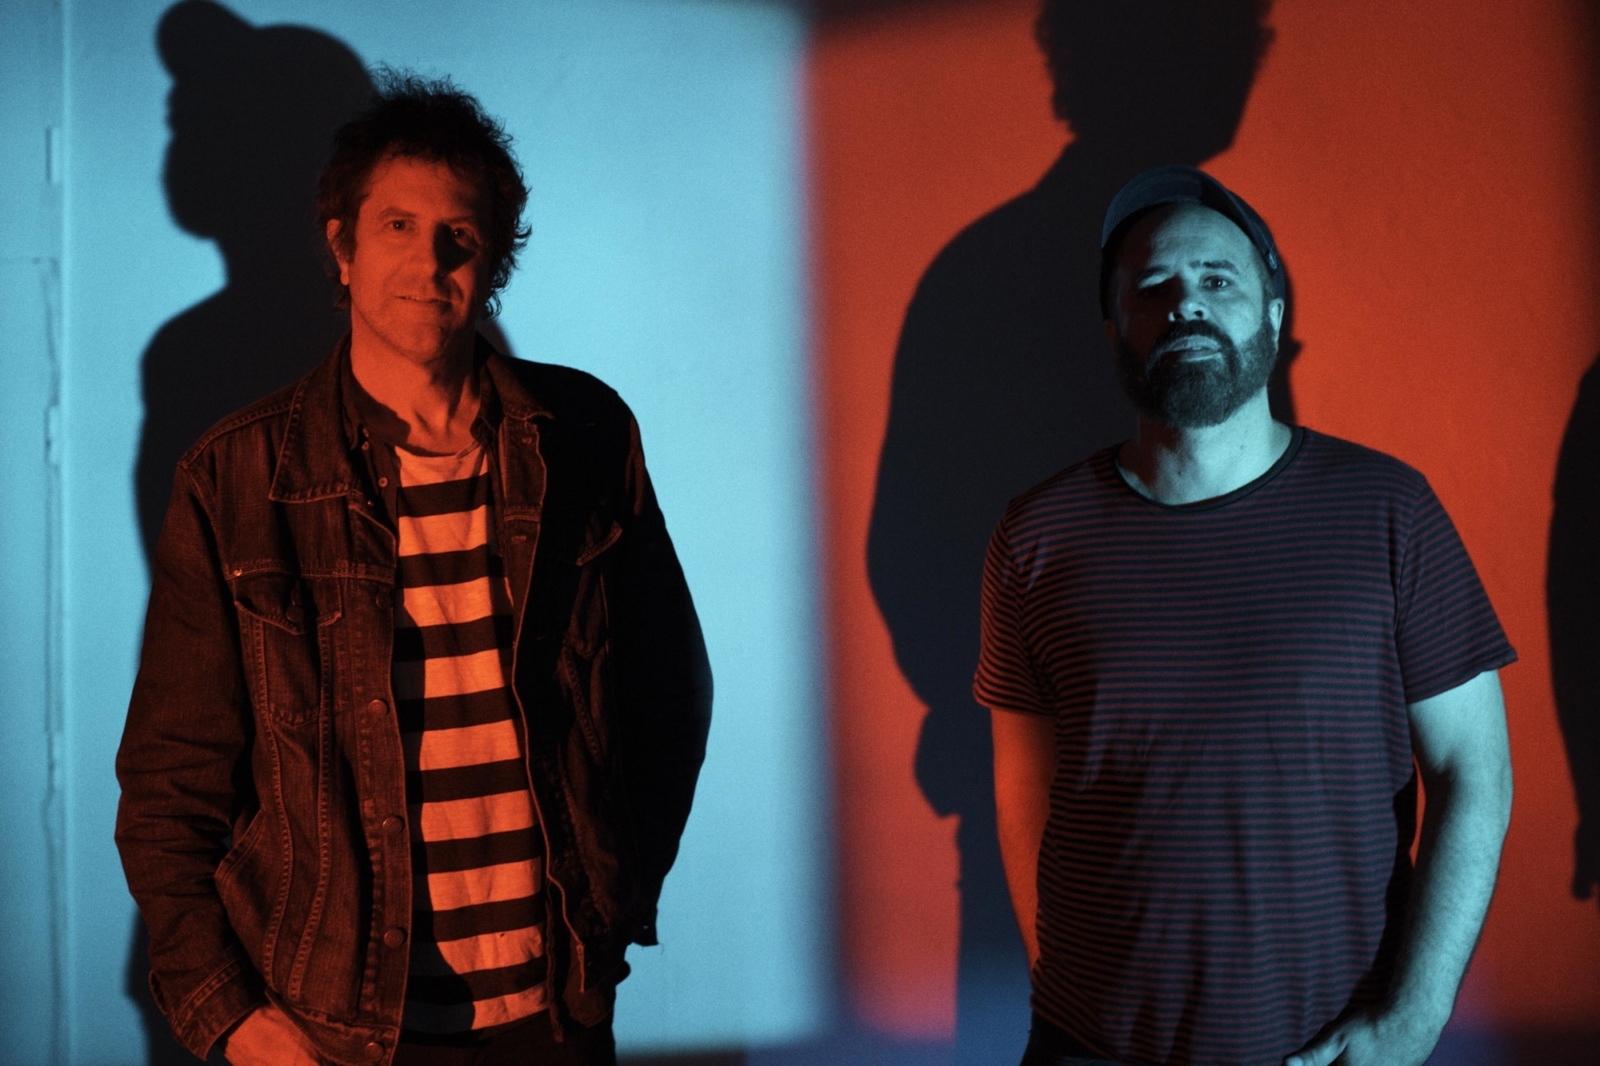 Swervedriver share another taste of ‘Future Ruins’ with ‘Drone Lover’